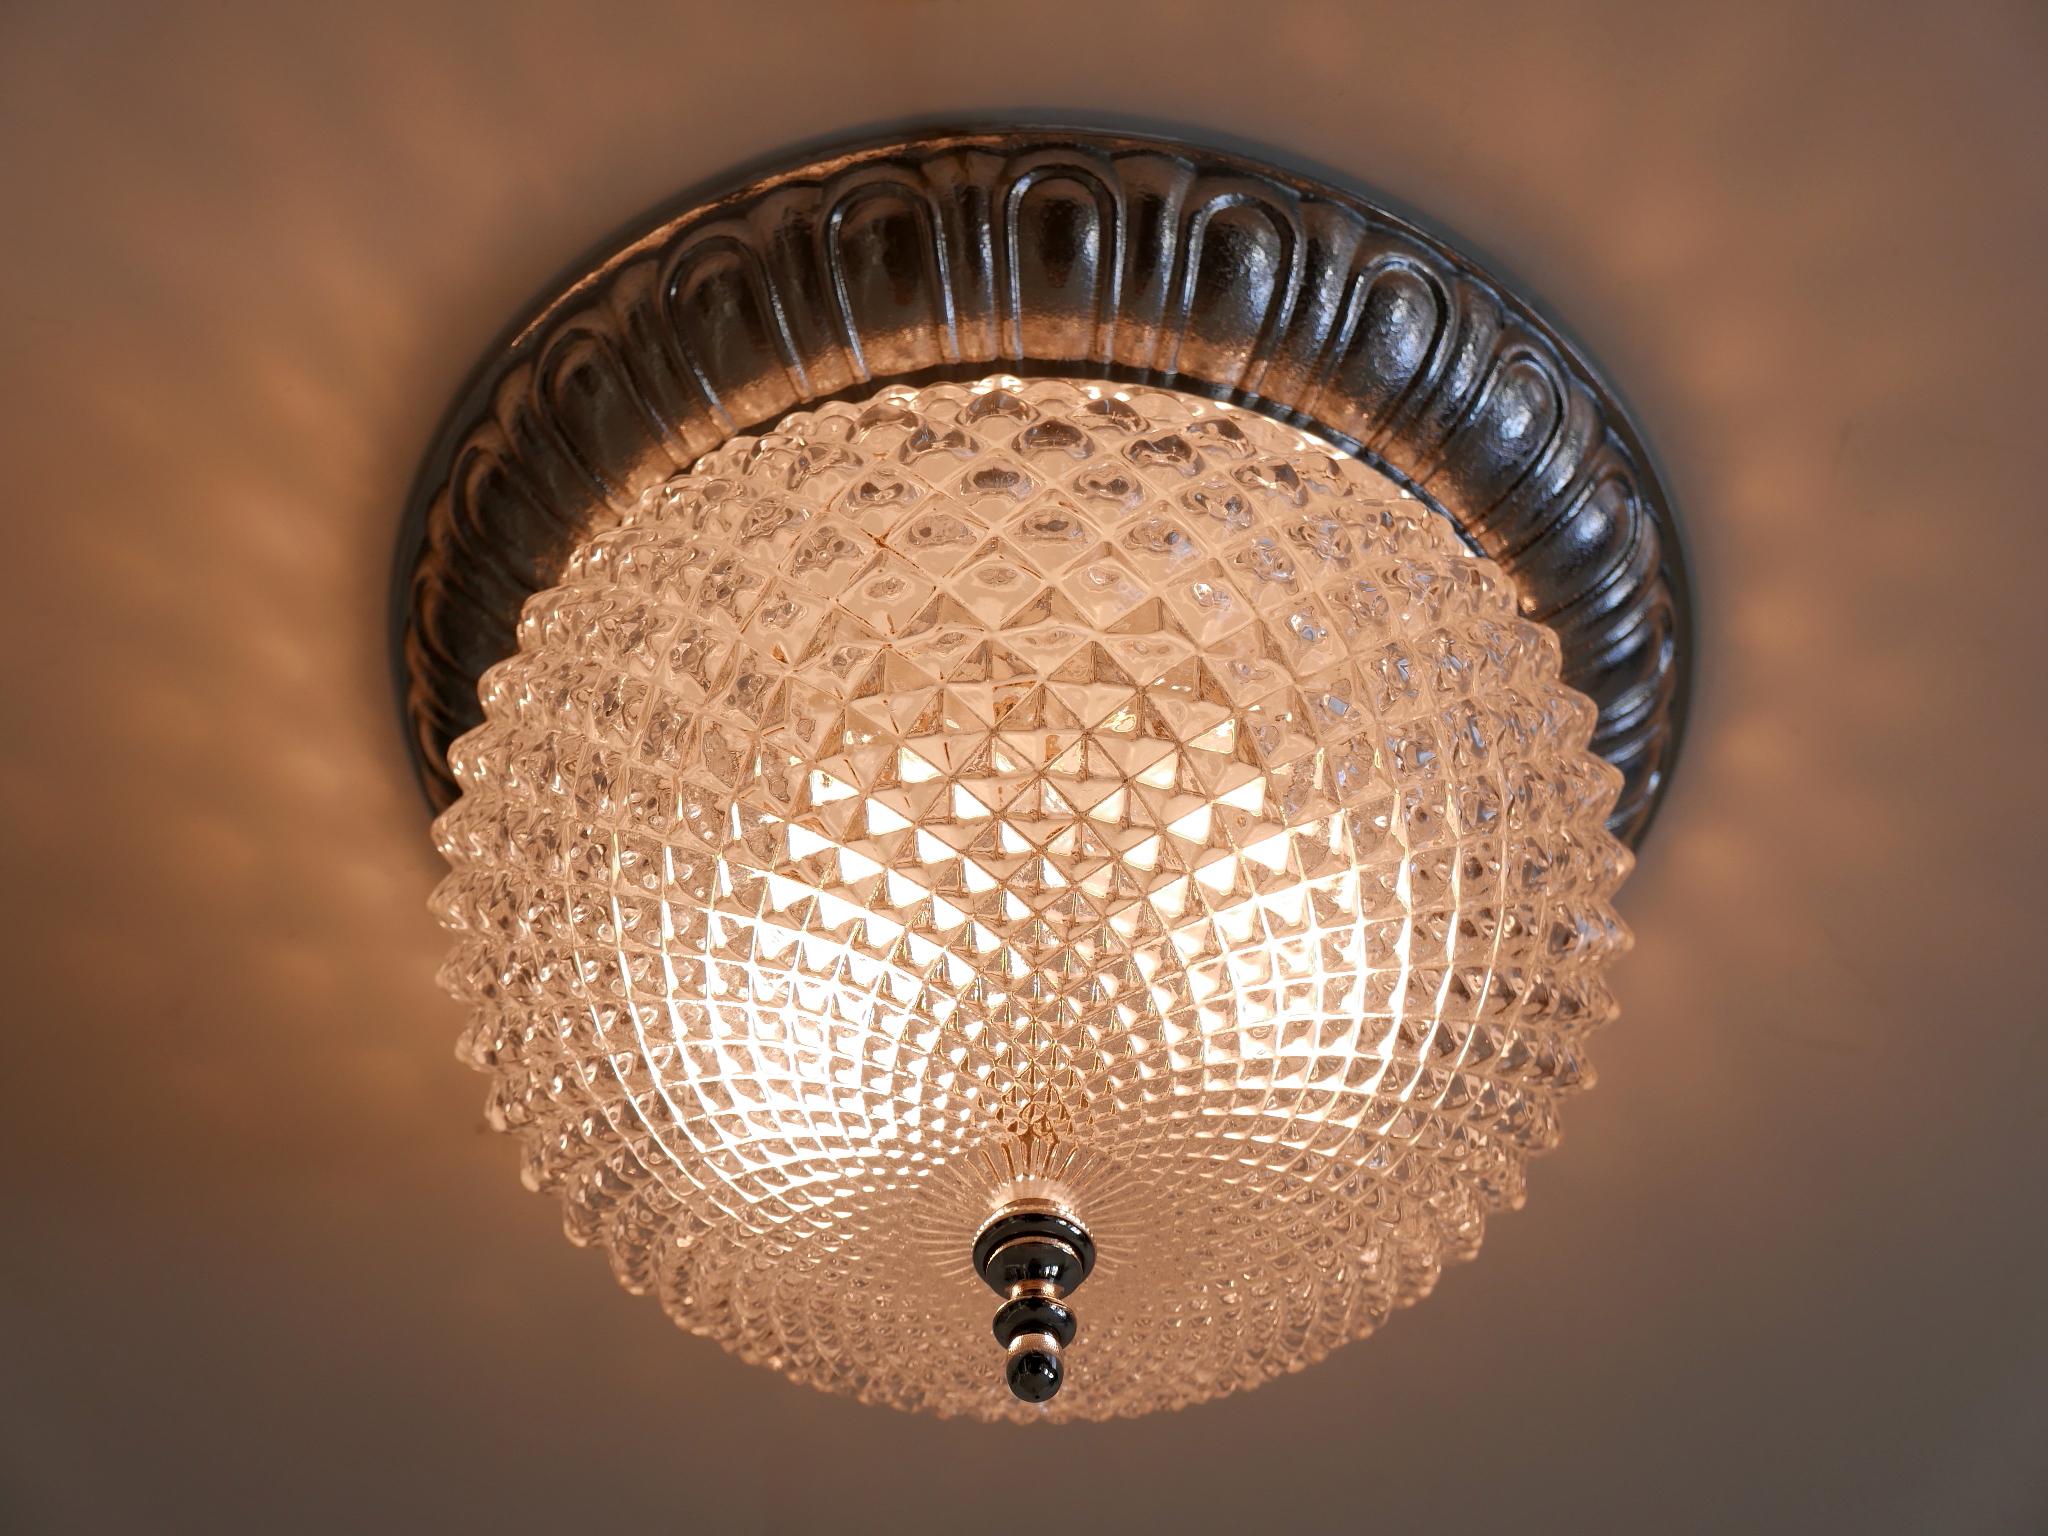 Highly decorative Mid Century Modern ceiling lamp / flush mount. Designed and manufactured by Sölken Leuchten, Germany, 1970s. Manufacturers label at the bottom.

Executed in textured glass and chrome-plated metal, the ceiling fixture has 2 x E14 /